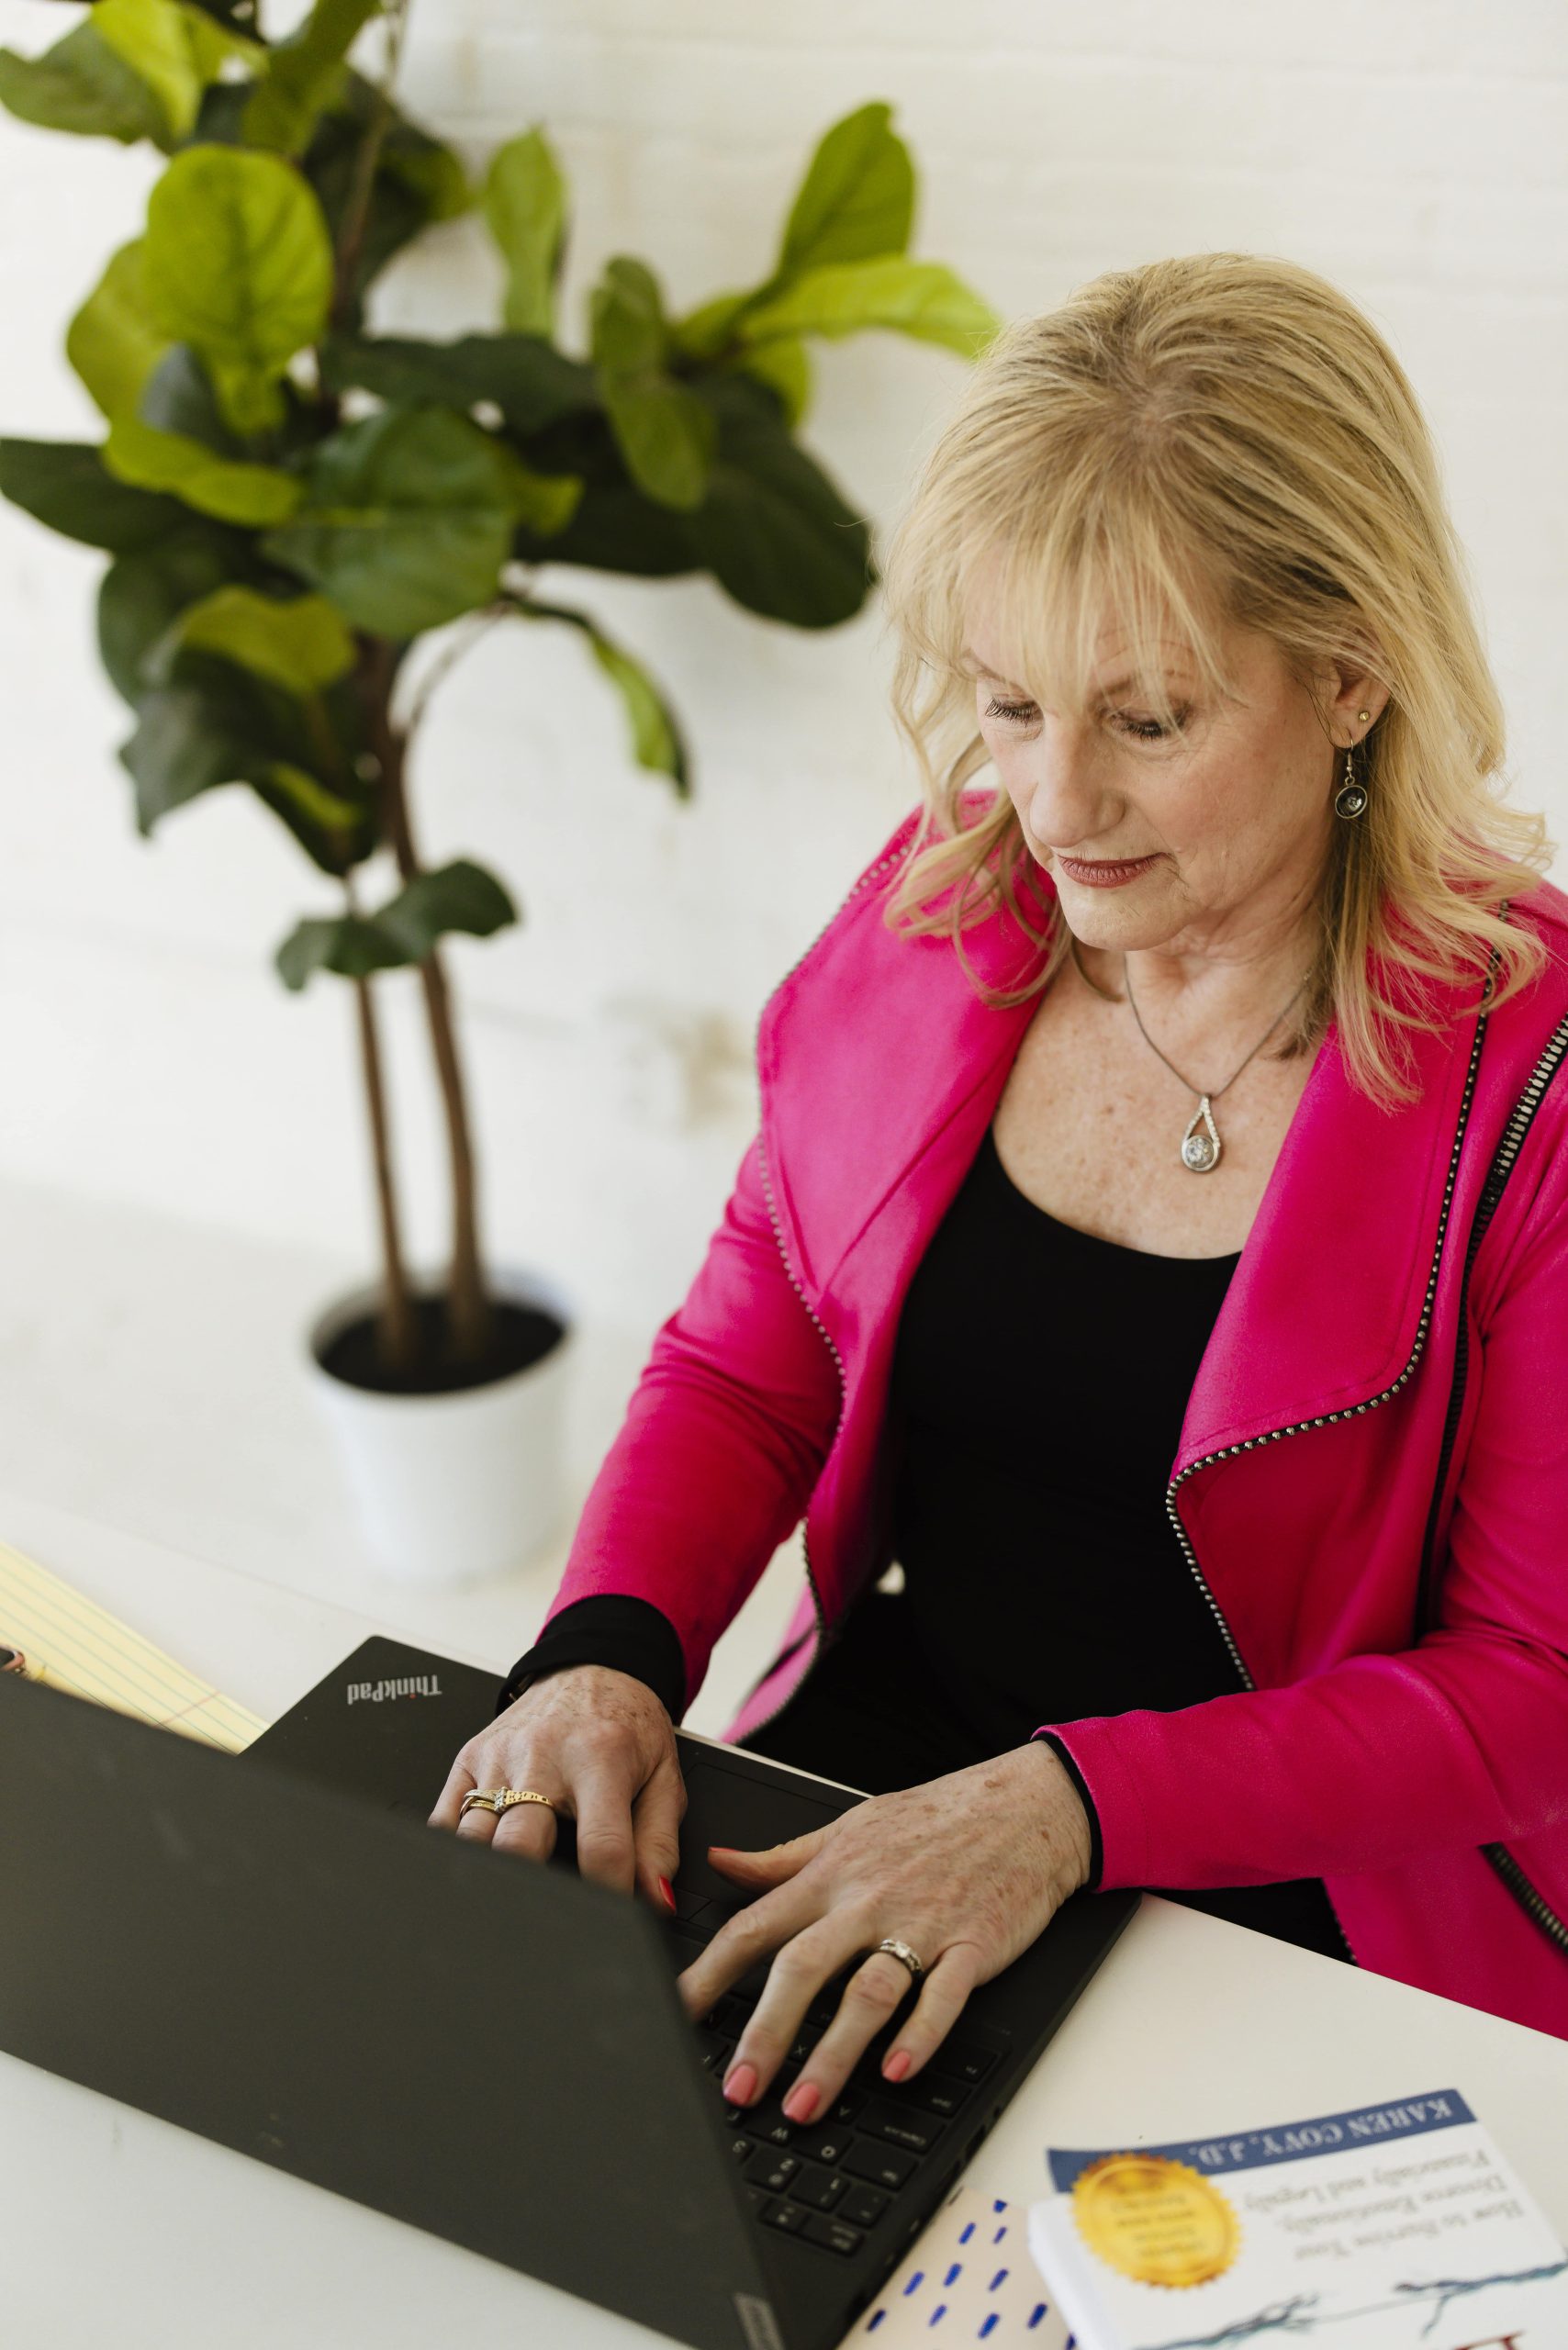 Karen Covy in a pink suit working on a laptop.